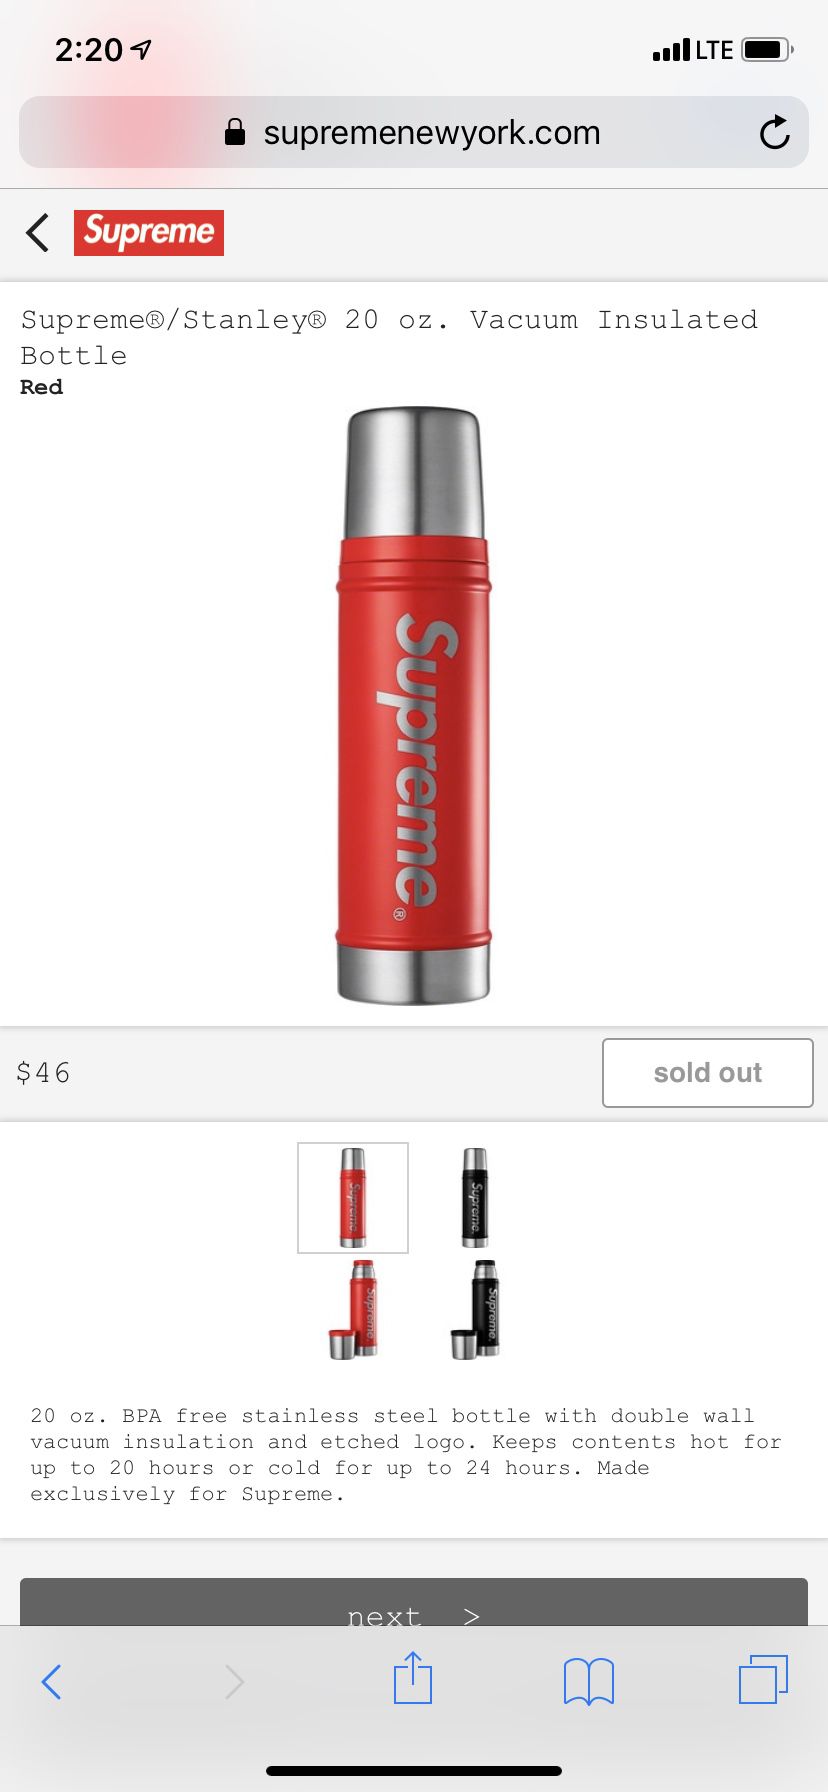 Supreme Stanley 20 oz. Vacuum Insulated Bottle